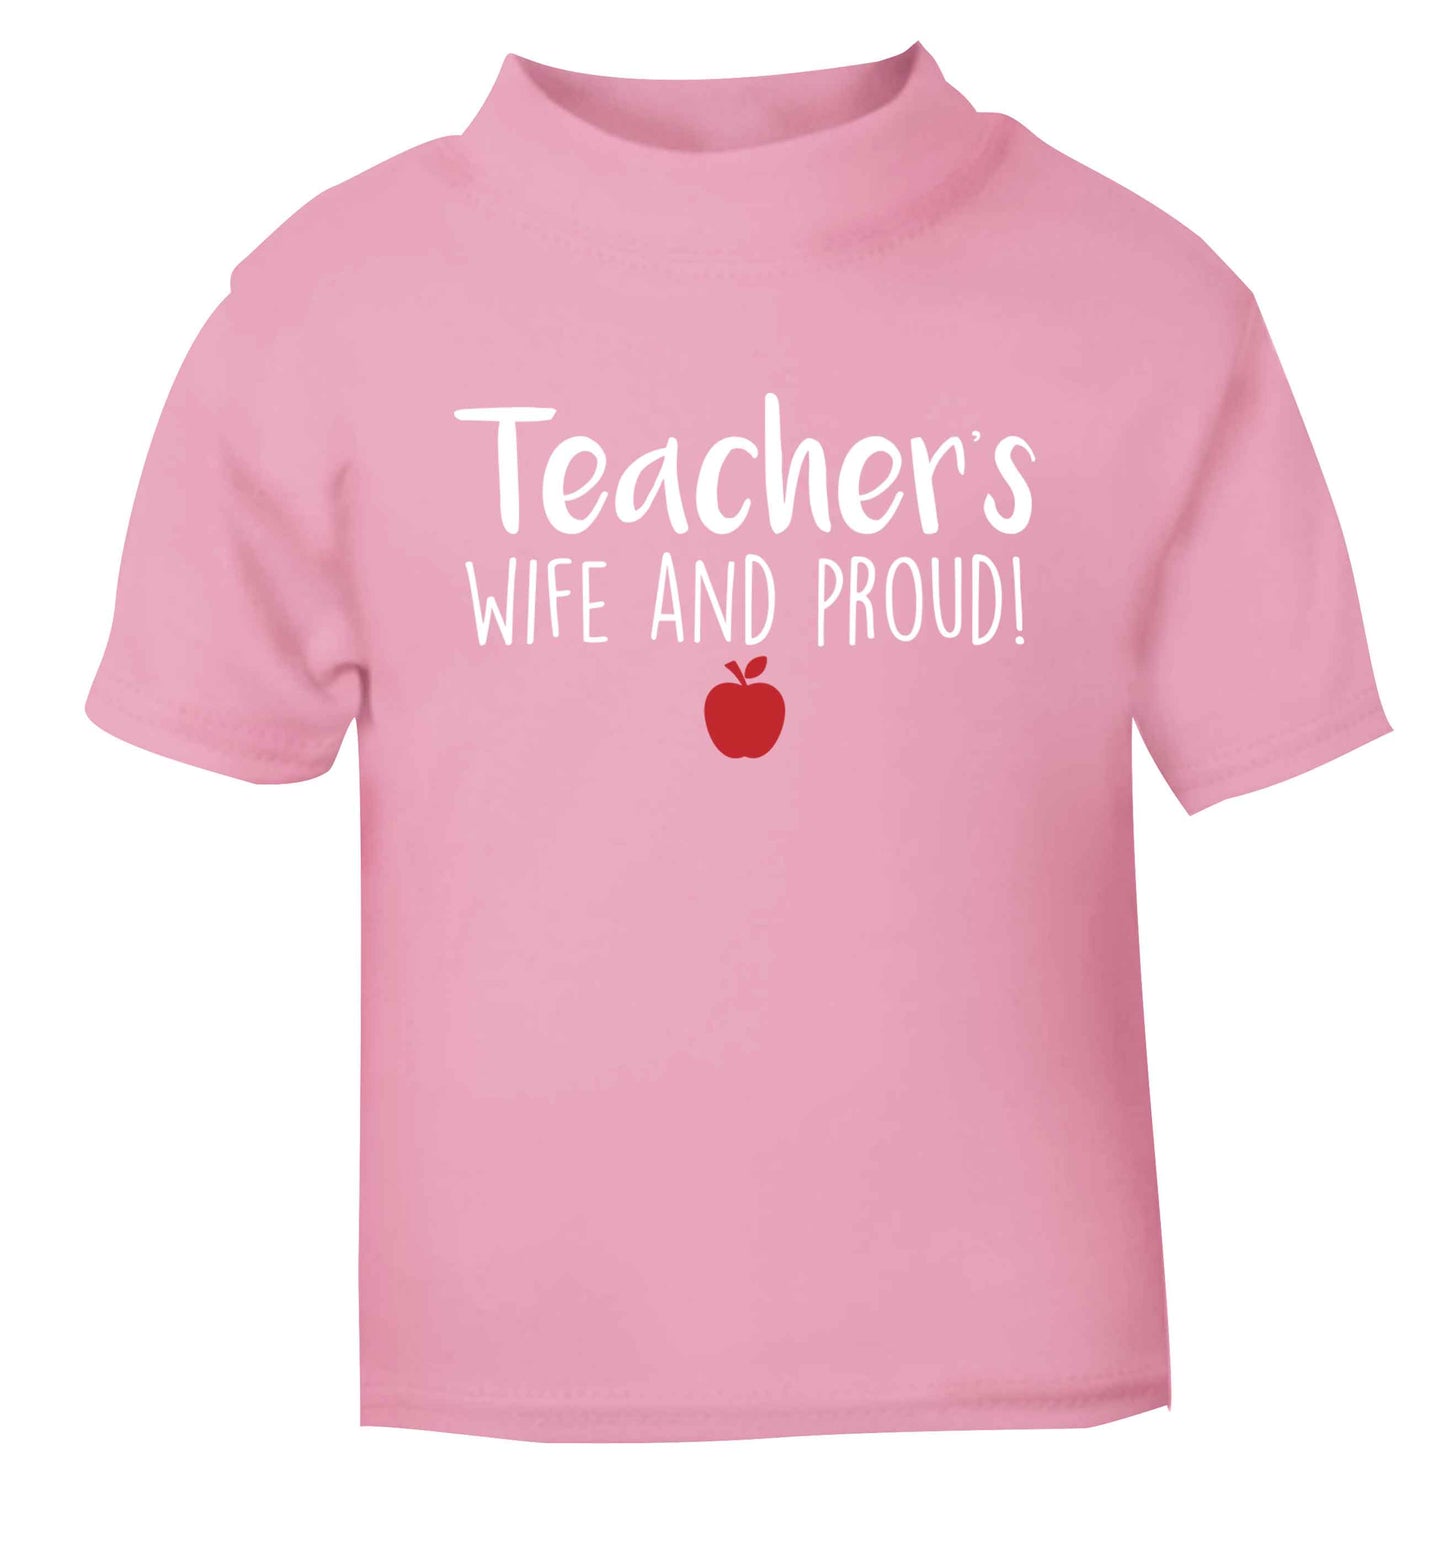 Teachers wife and proud light pink baby toddler Tshirt 2 Years